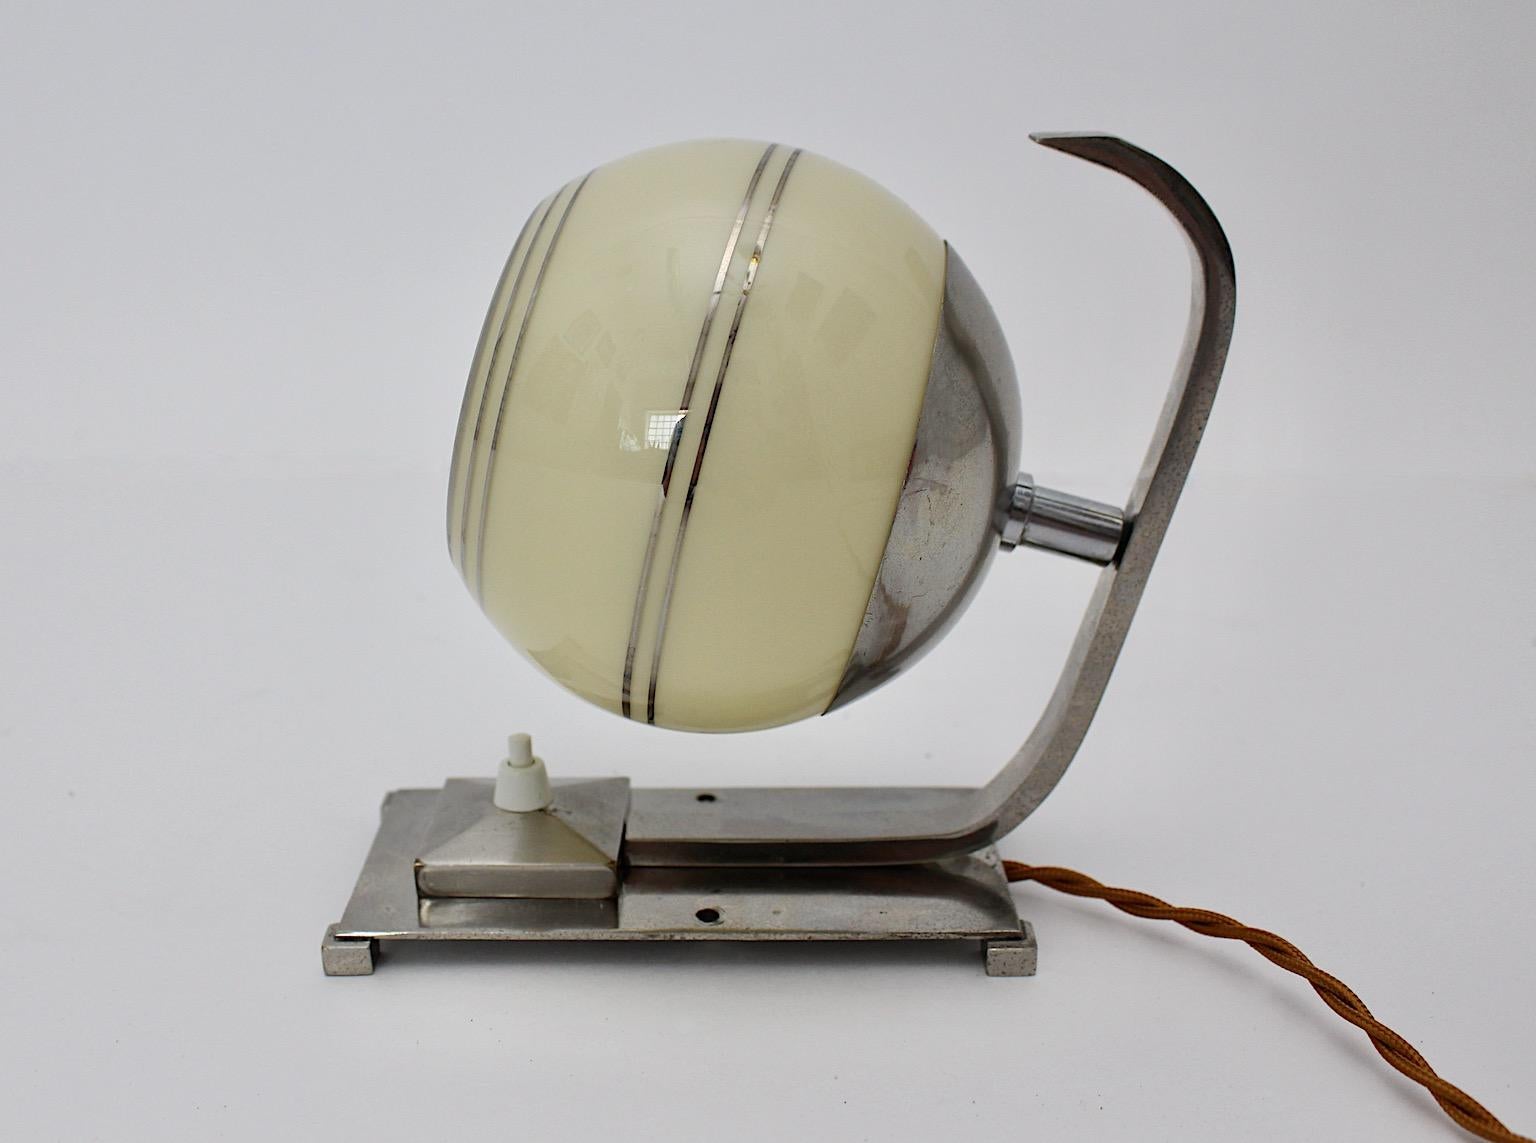 Art Deco authentic table lamp or wall light or sconce from nickel plated brass and glass circa 1925 Austria.
A beautiful lighting with nickel plated brass frame and ivory color glass shade embellished with silver stripes.
On/off switch, One E 27